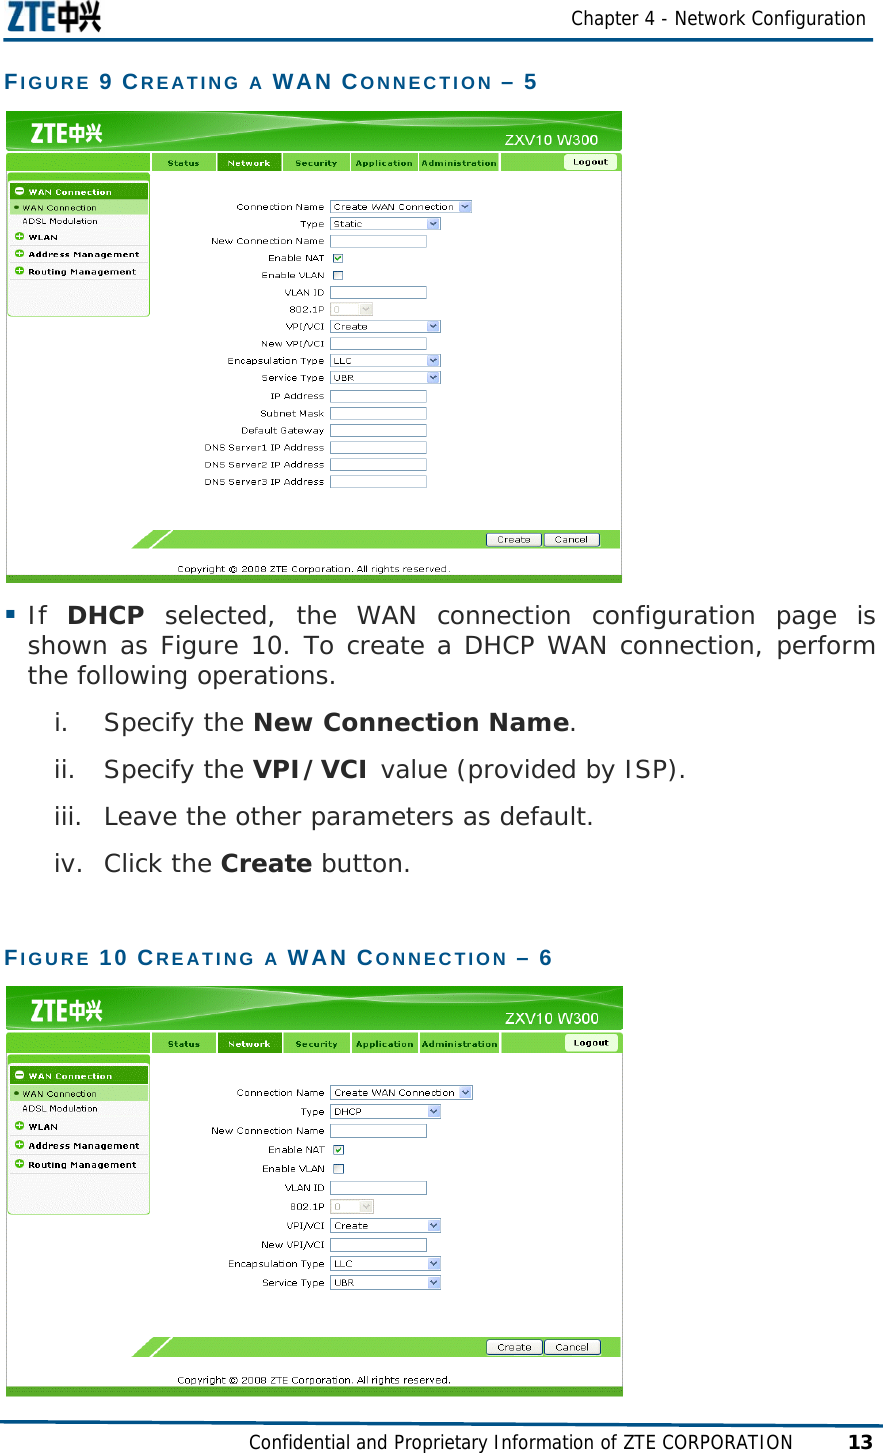  Chapter 4 - Network Configuration Confidential and Proprietary Information of ZTE CORPORATION 13 FIGURE 9 CREATING A WAN CONNECTION – 5   If  DHCP selected, the WAN connection configuration page is shown as Figure 10. To create a DHCP WAN connection, perform the following operations. i. Specify the New Connection Name. ii. Specify the VPI/VCI value (provided by ISP). iii. Leave the other parameters as default. iv. Click the Create button. FIGURE 10 CREATING A WAN CONNECTION – 6  